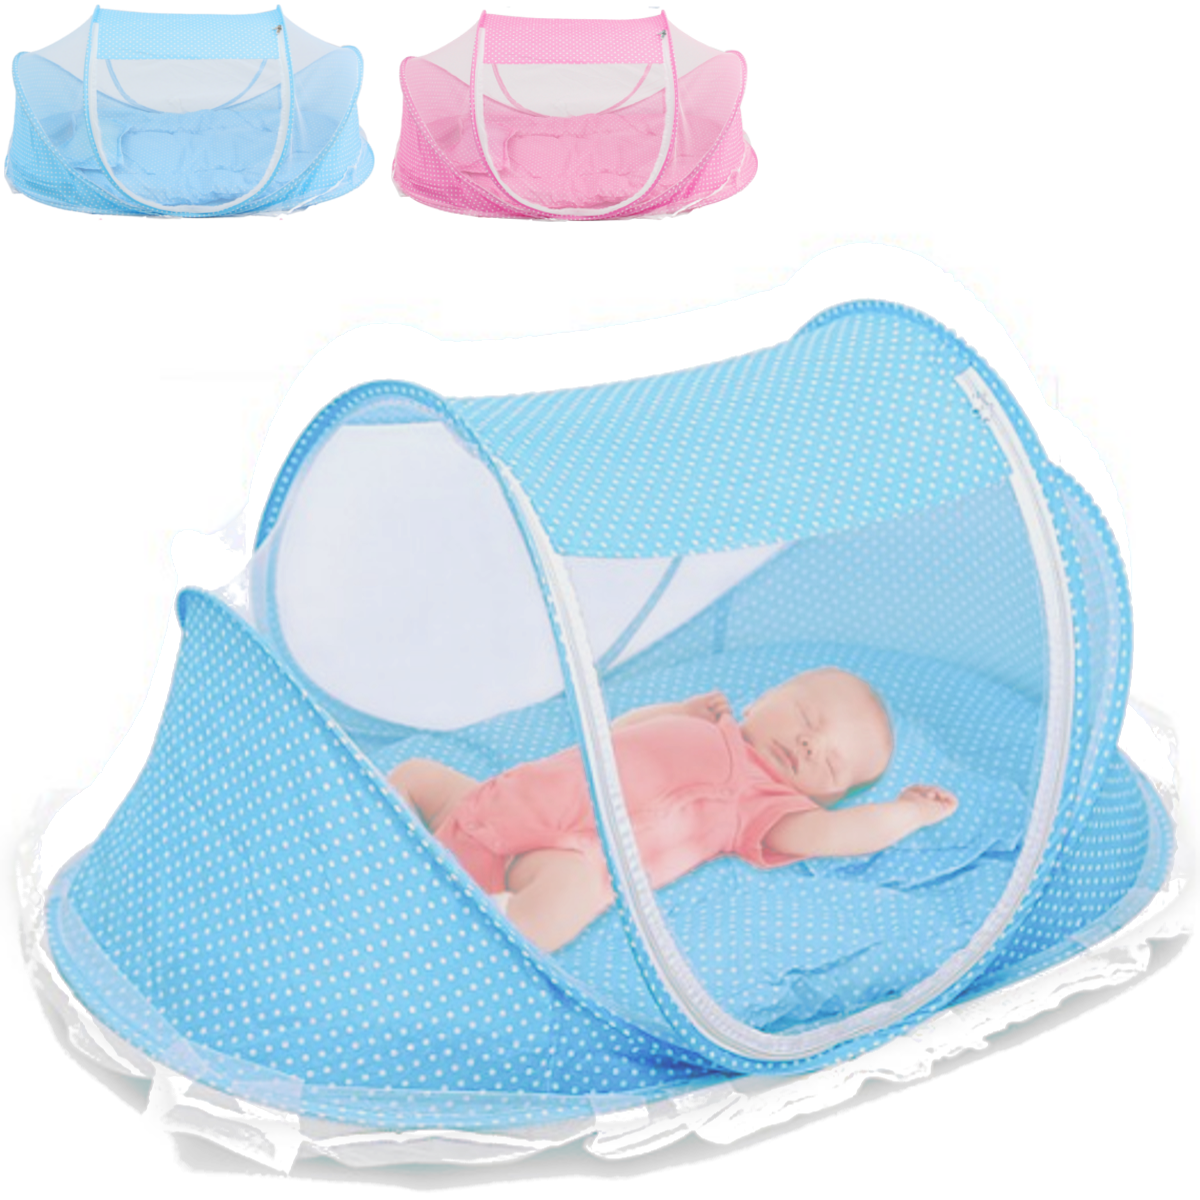 

Foldable Mosquito Net Folding Baby Travel Bed Crib Canopy Pop up Beach Mesh